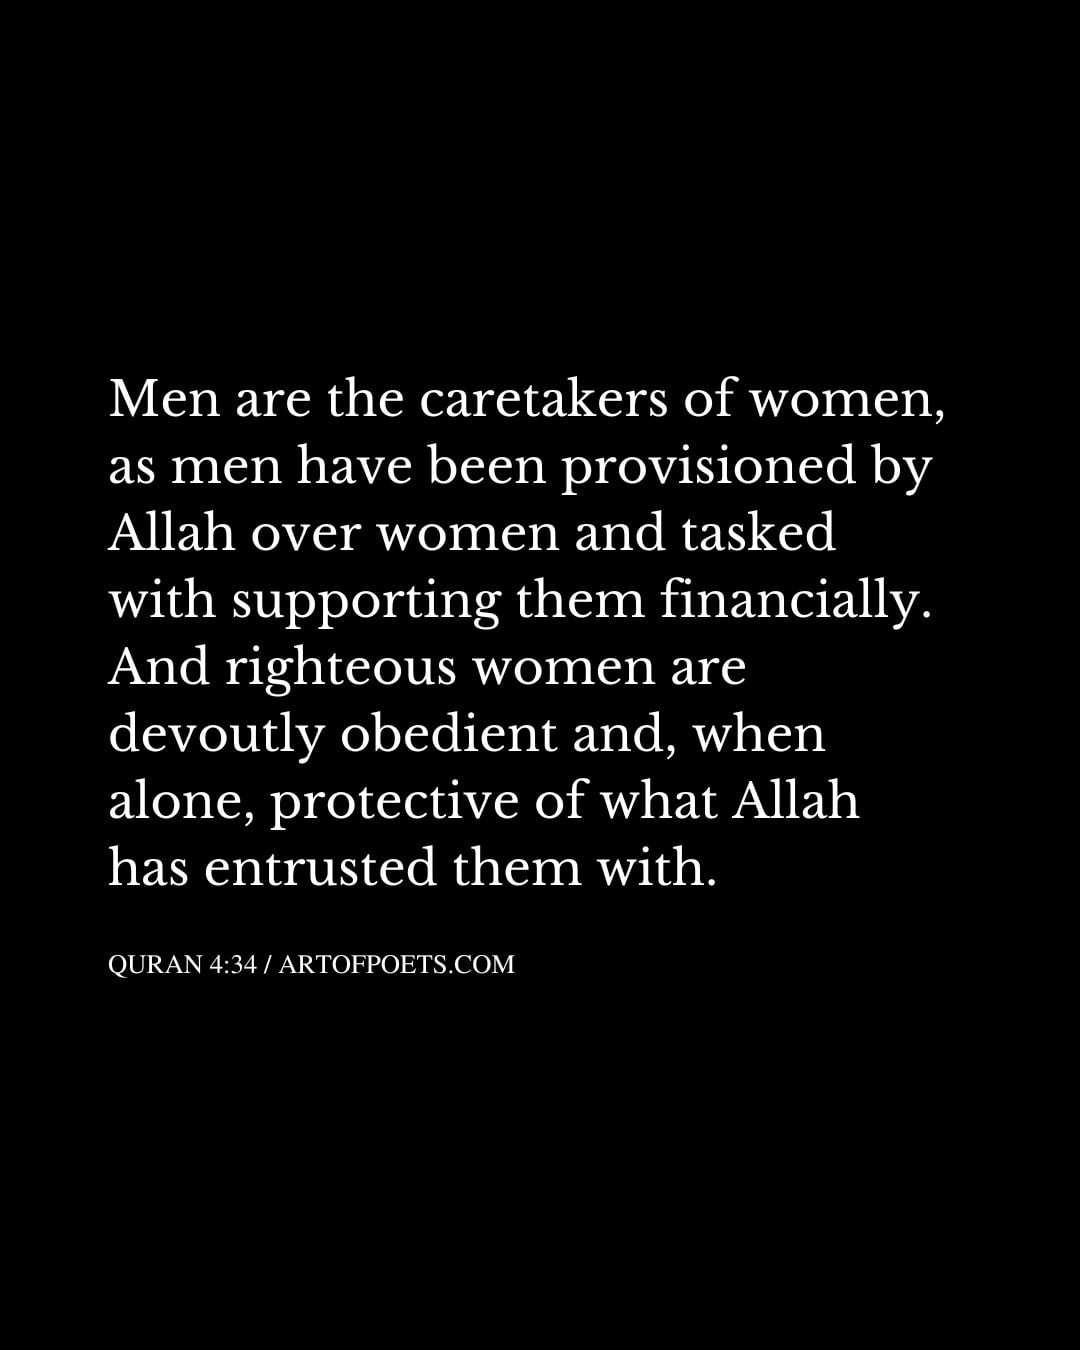 Men are the caretakers of women as men have been provisioned by Allah over women and tasked with supporting them financially